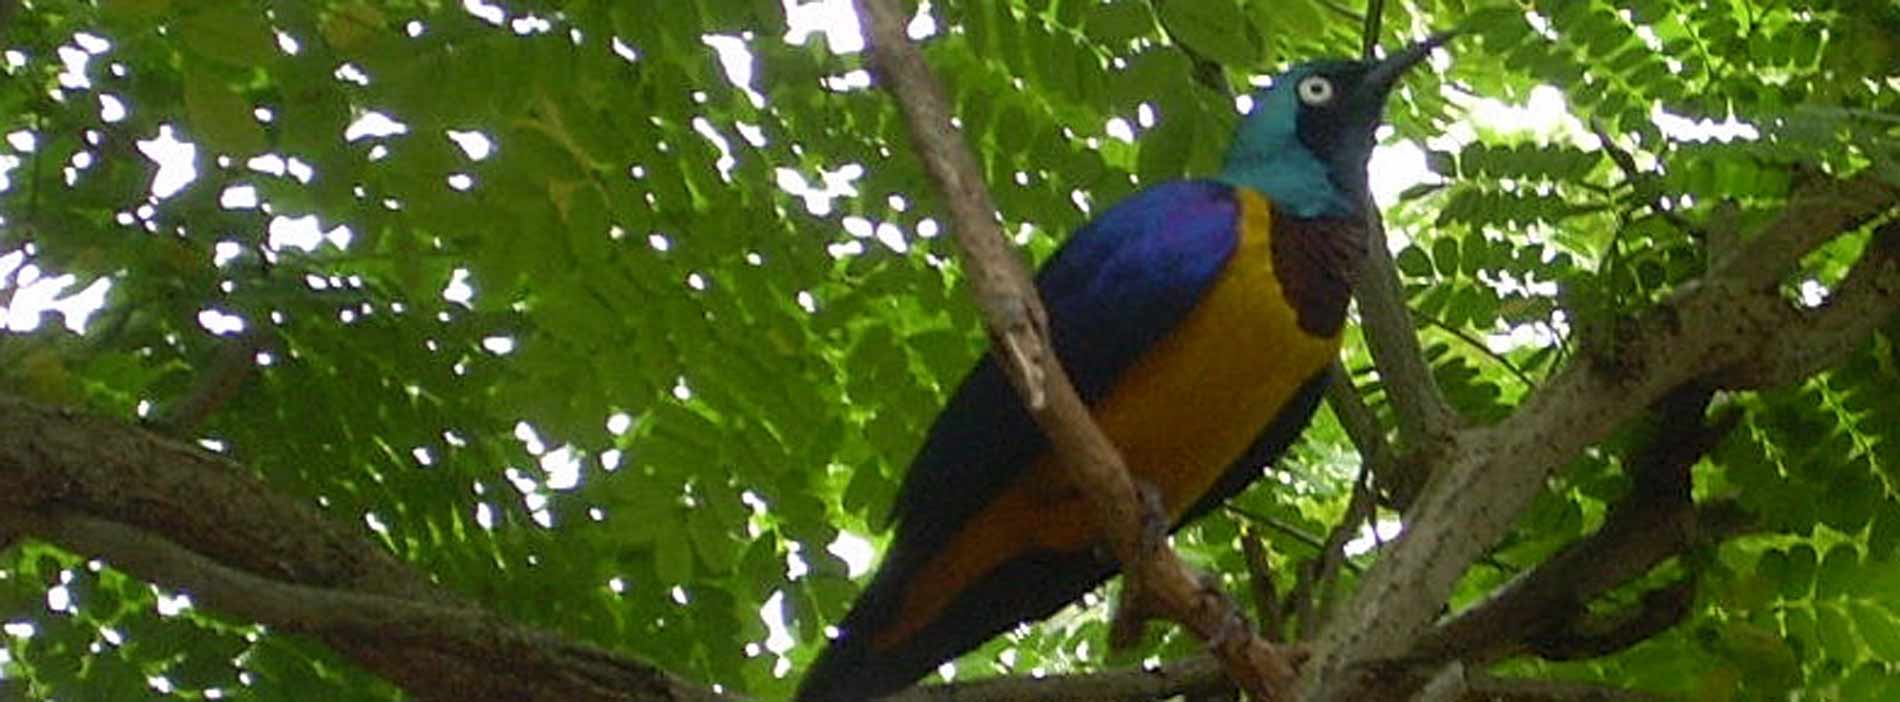 Golden breasted starling